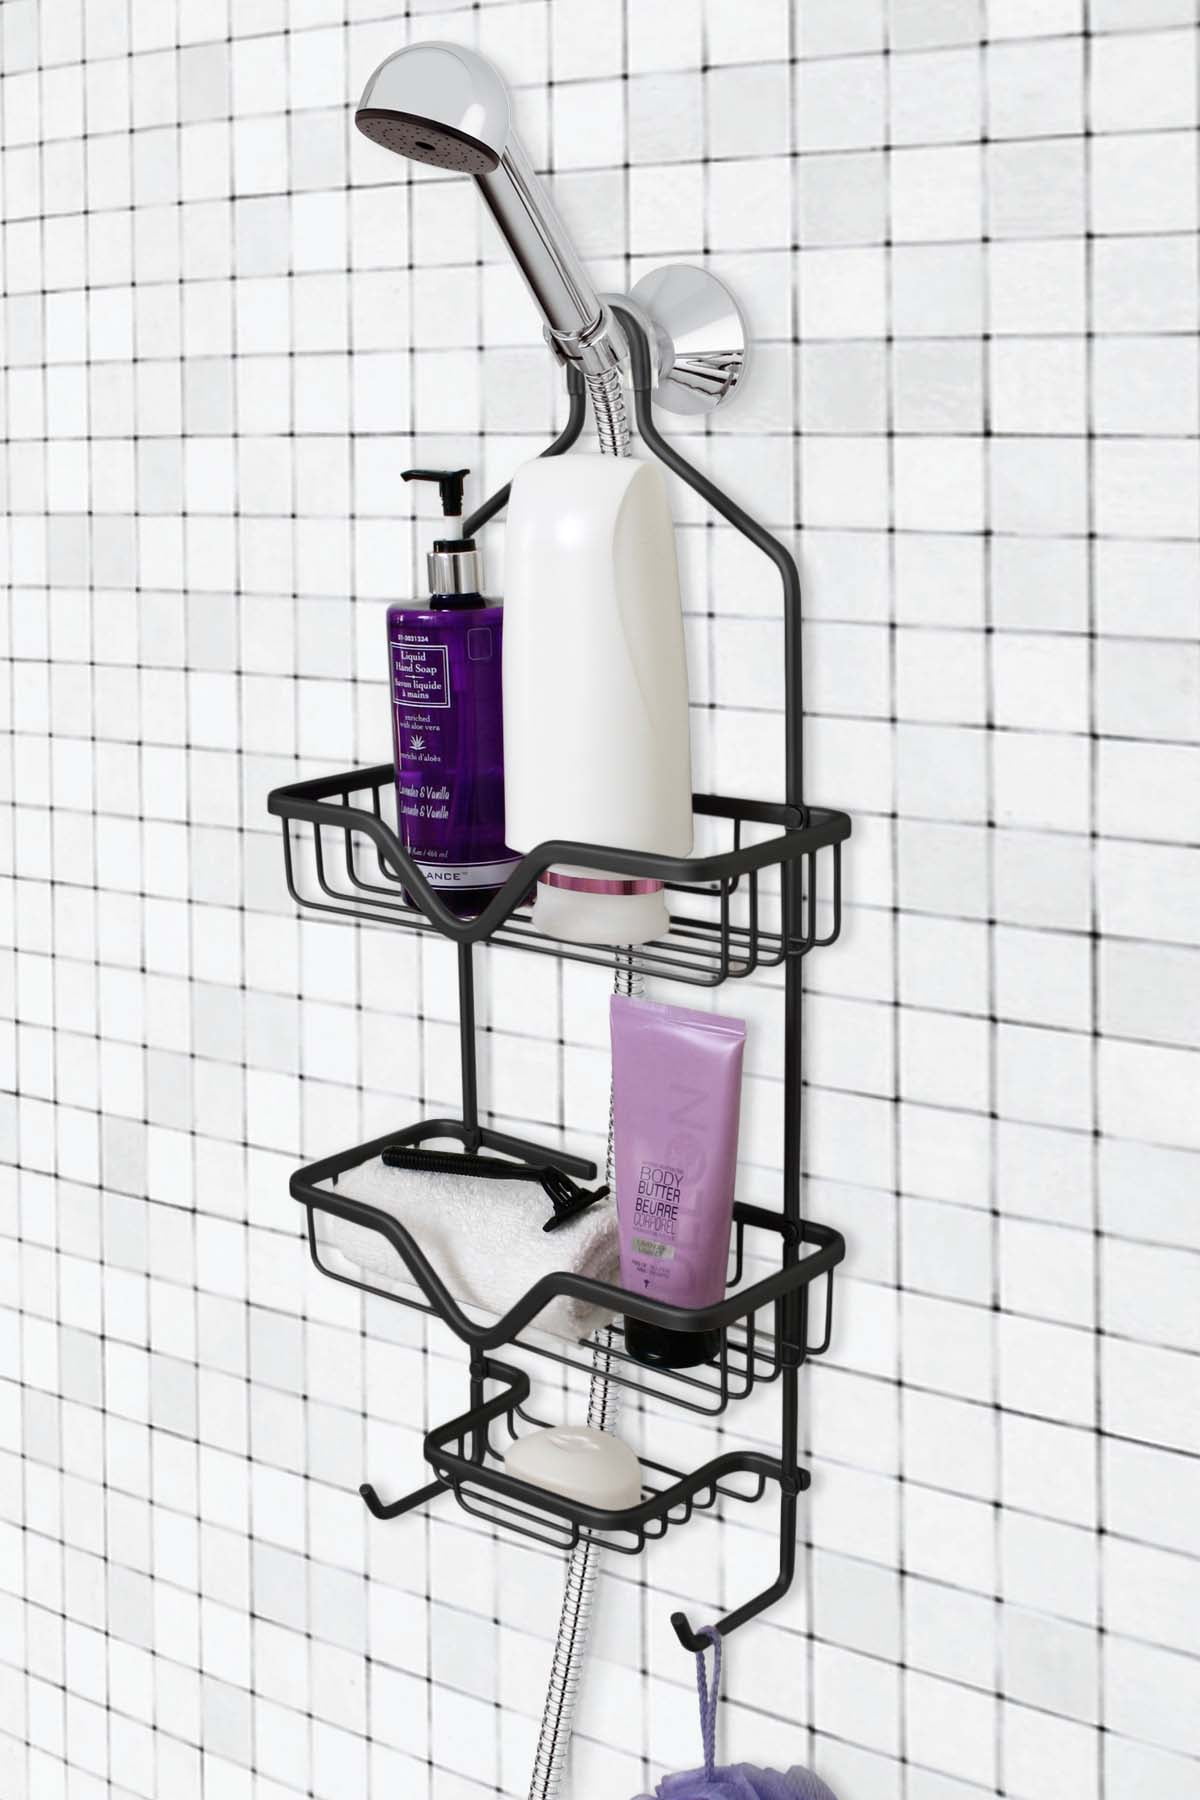 Practical Stainless Steel Shower Shelves Bronze Hanging Shower Storage Baskets for All Your Shower Accessories on 2 Tiers 27.4 cm x 16.4 cm x 54.9 cm mDesign Over Door Shower Caddy 